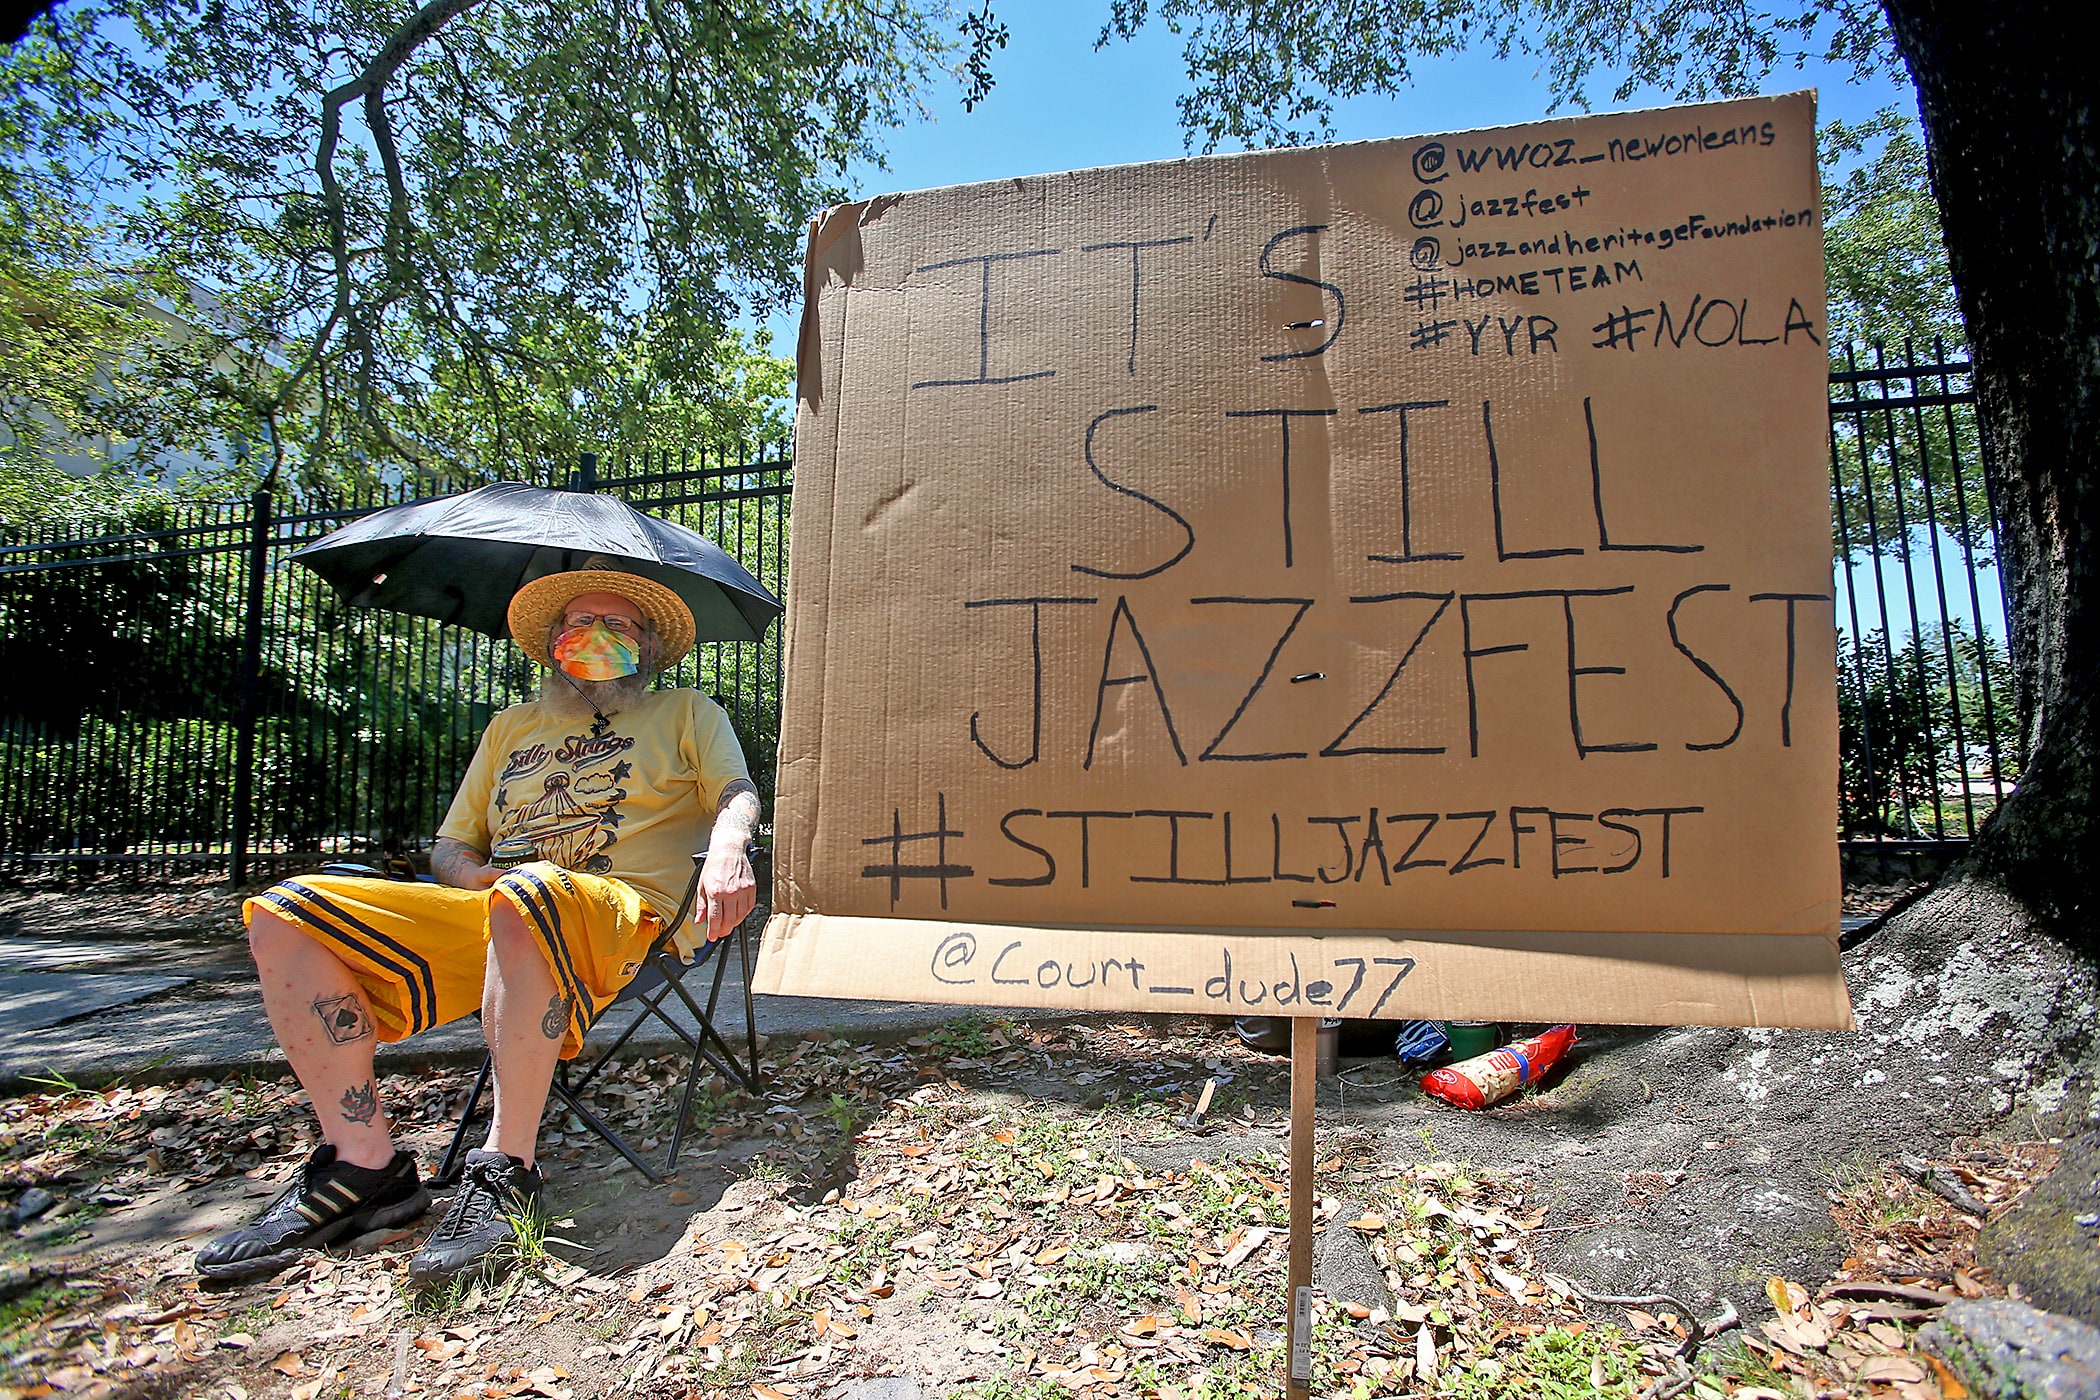 Courtney McColloch is determined the show must go on as he listens to the WWOZ broadcast outside the shuttered gates of the Fair Grounds after the 2020 New Orleans Jazz &amp; Heritage Festival was cancelled by the Covid-19 pandemic. Photographed on Friday, April 24, 2020. (Photo by Michael DeMocker)